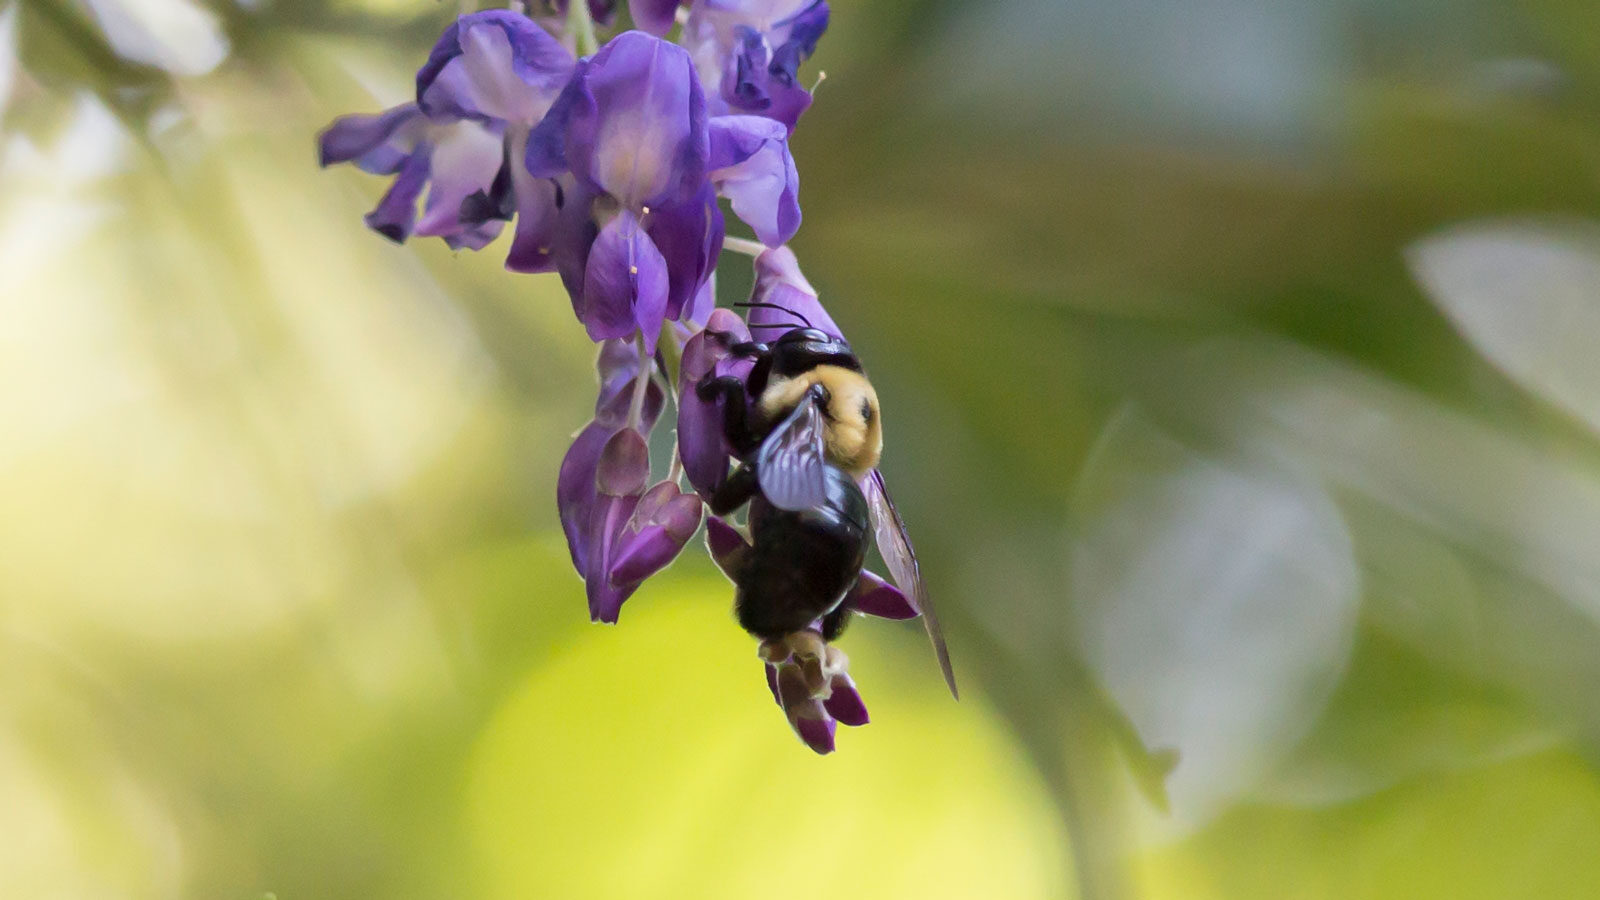 Eastern carpenter bee eating nectar from a purple flower